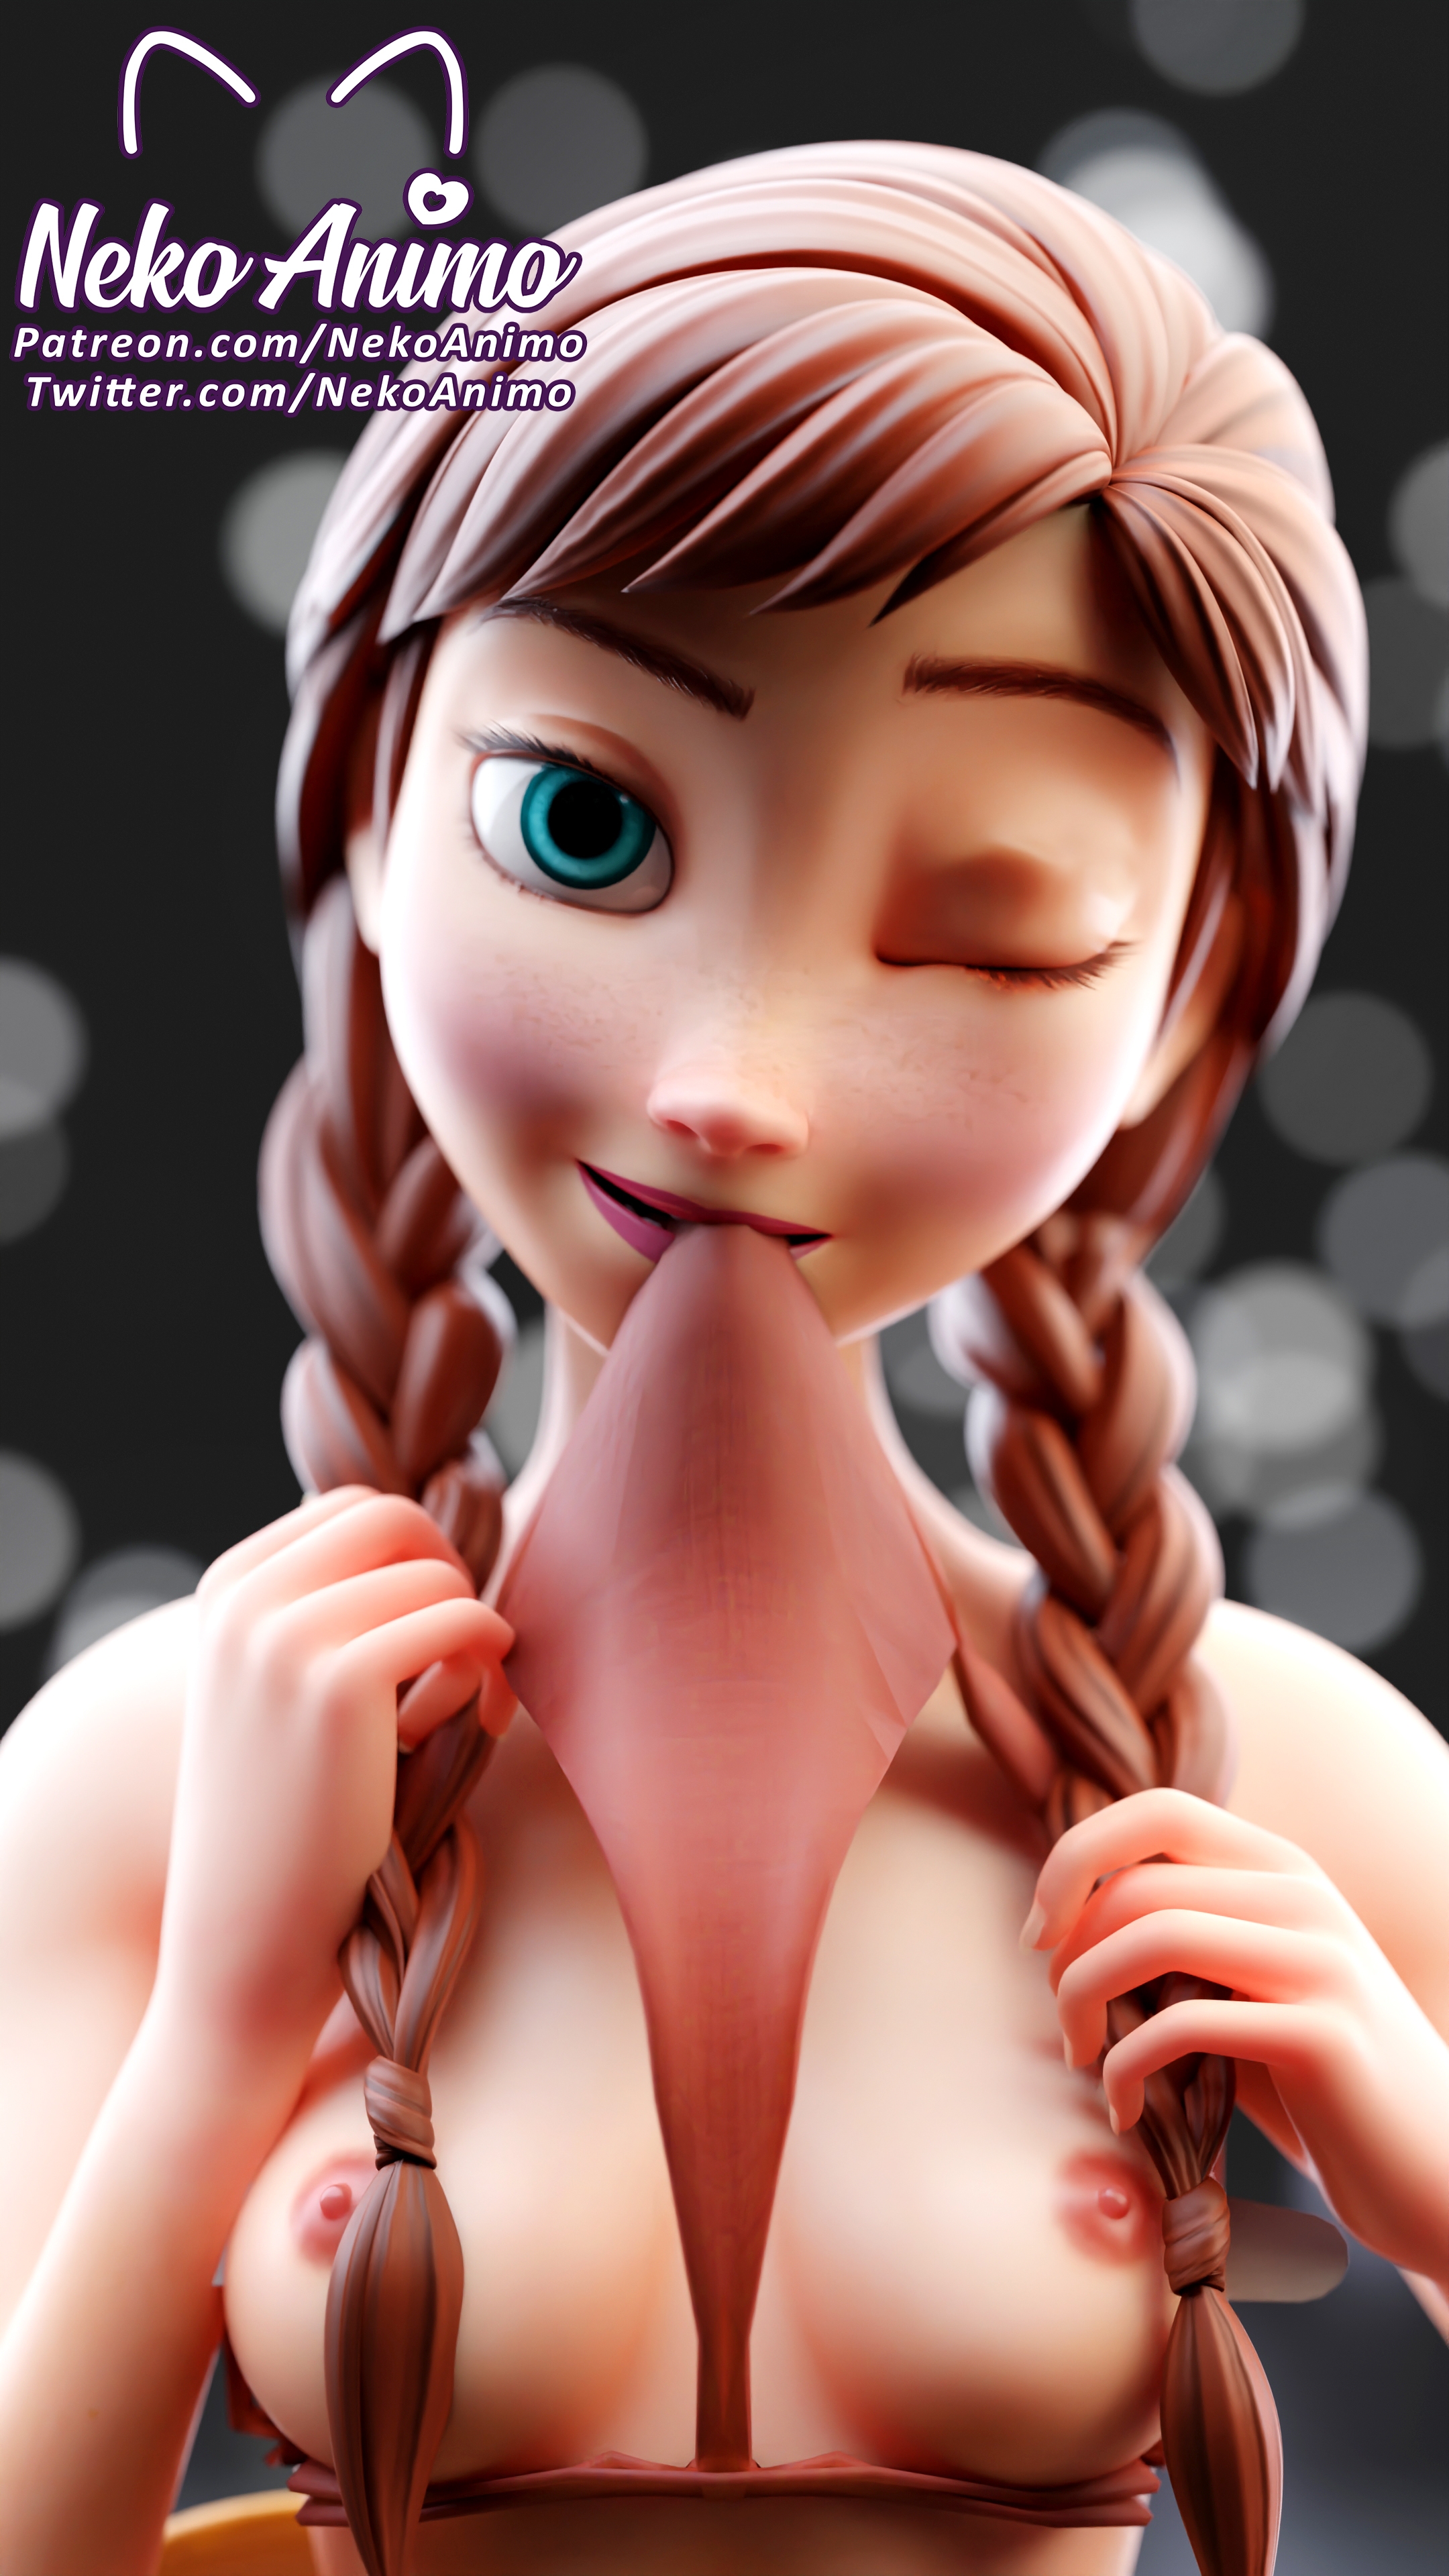 debbie fritchman recommends naked anna from frozen pic